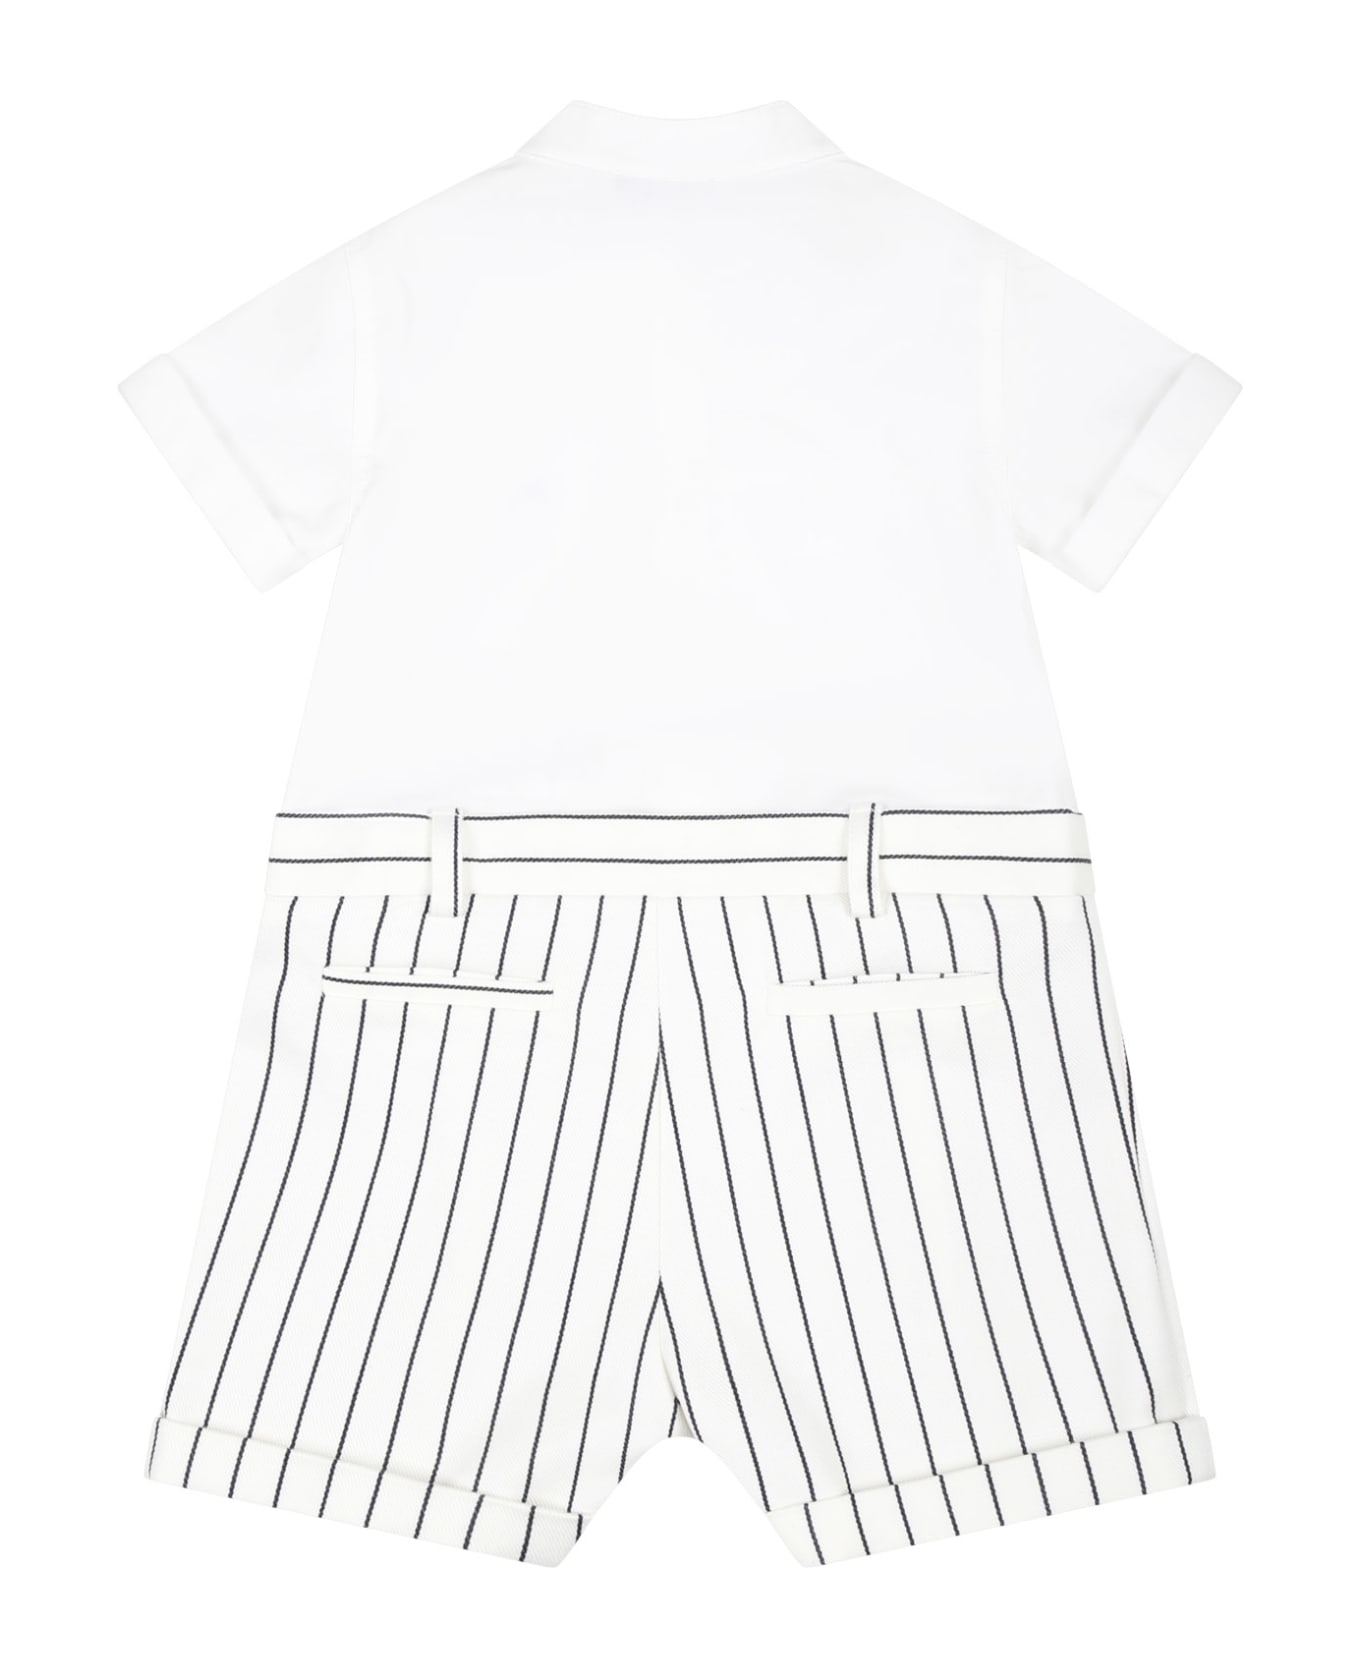 Fay White Romper For Baby Boy With Logo - White